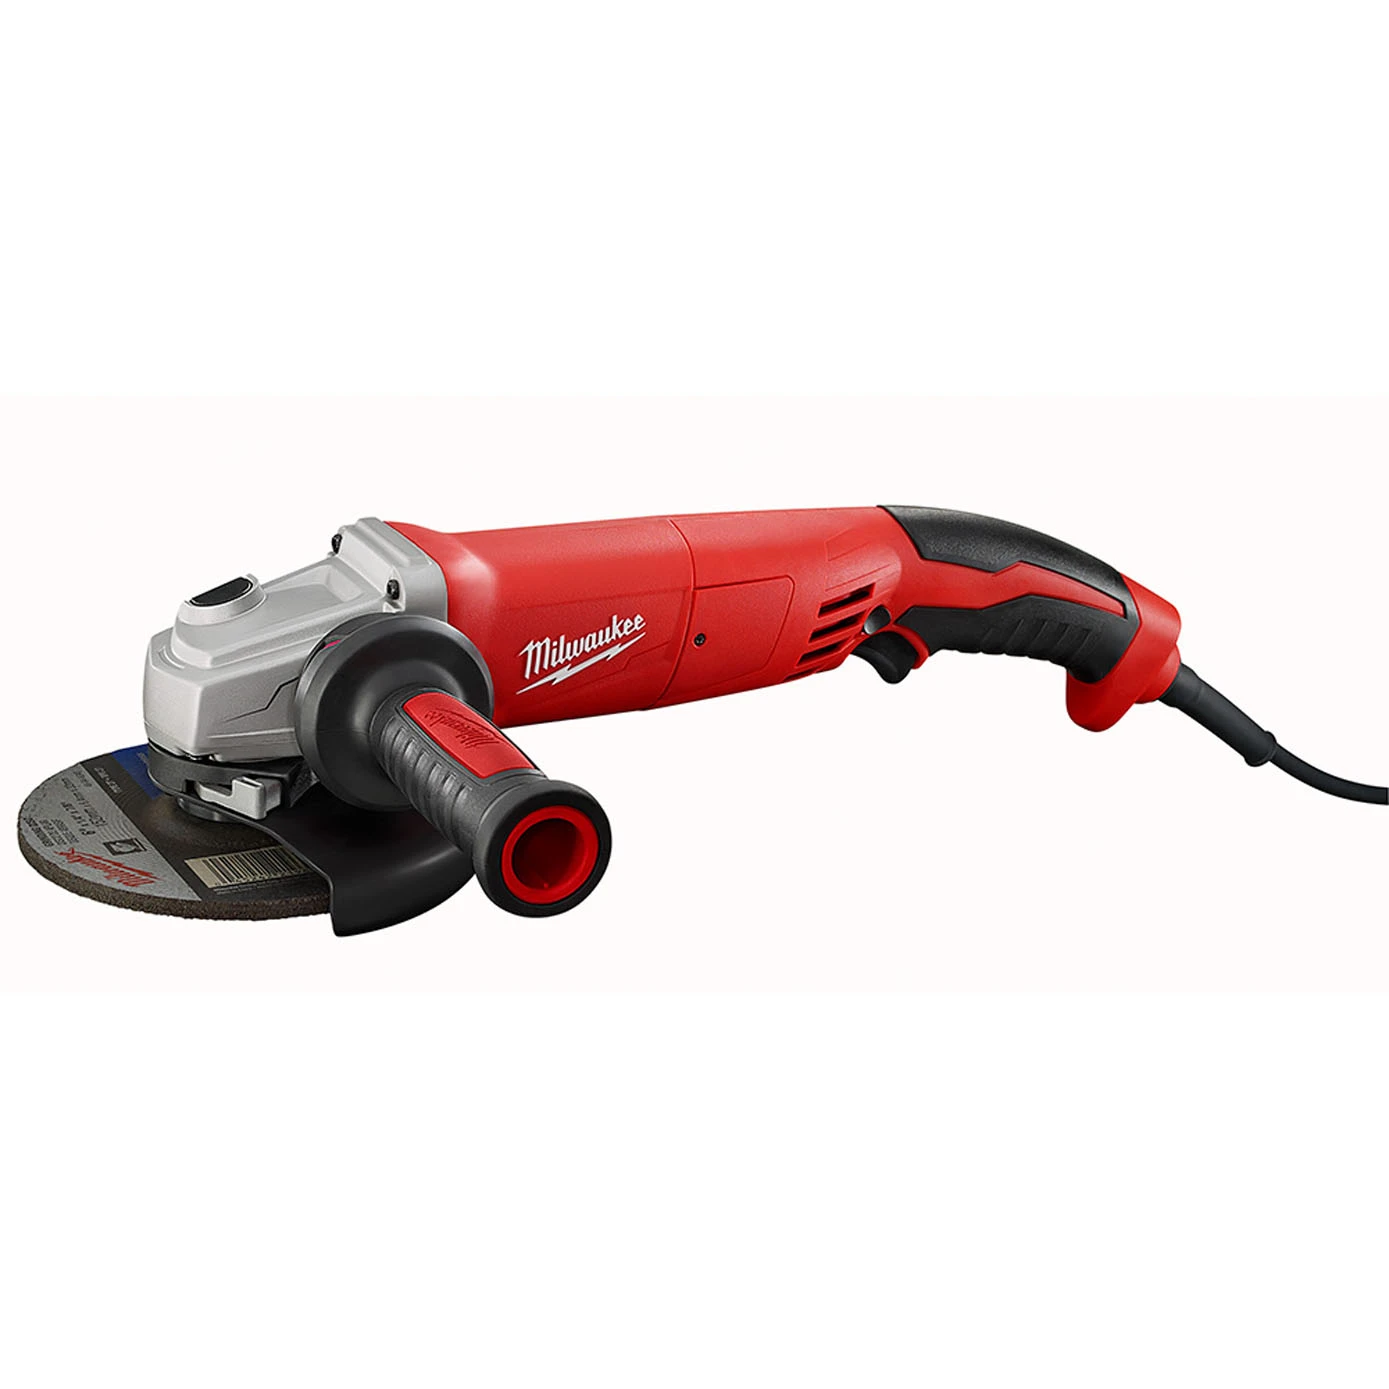 Milwaukee 6124-31 13 Amp 5 in. Small Angle Grinder Trigger Grip